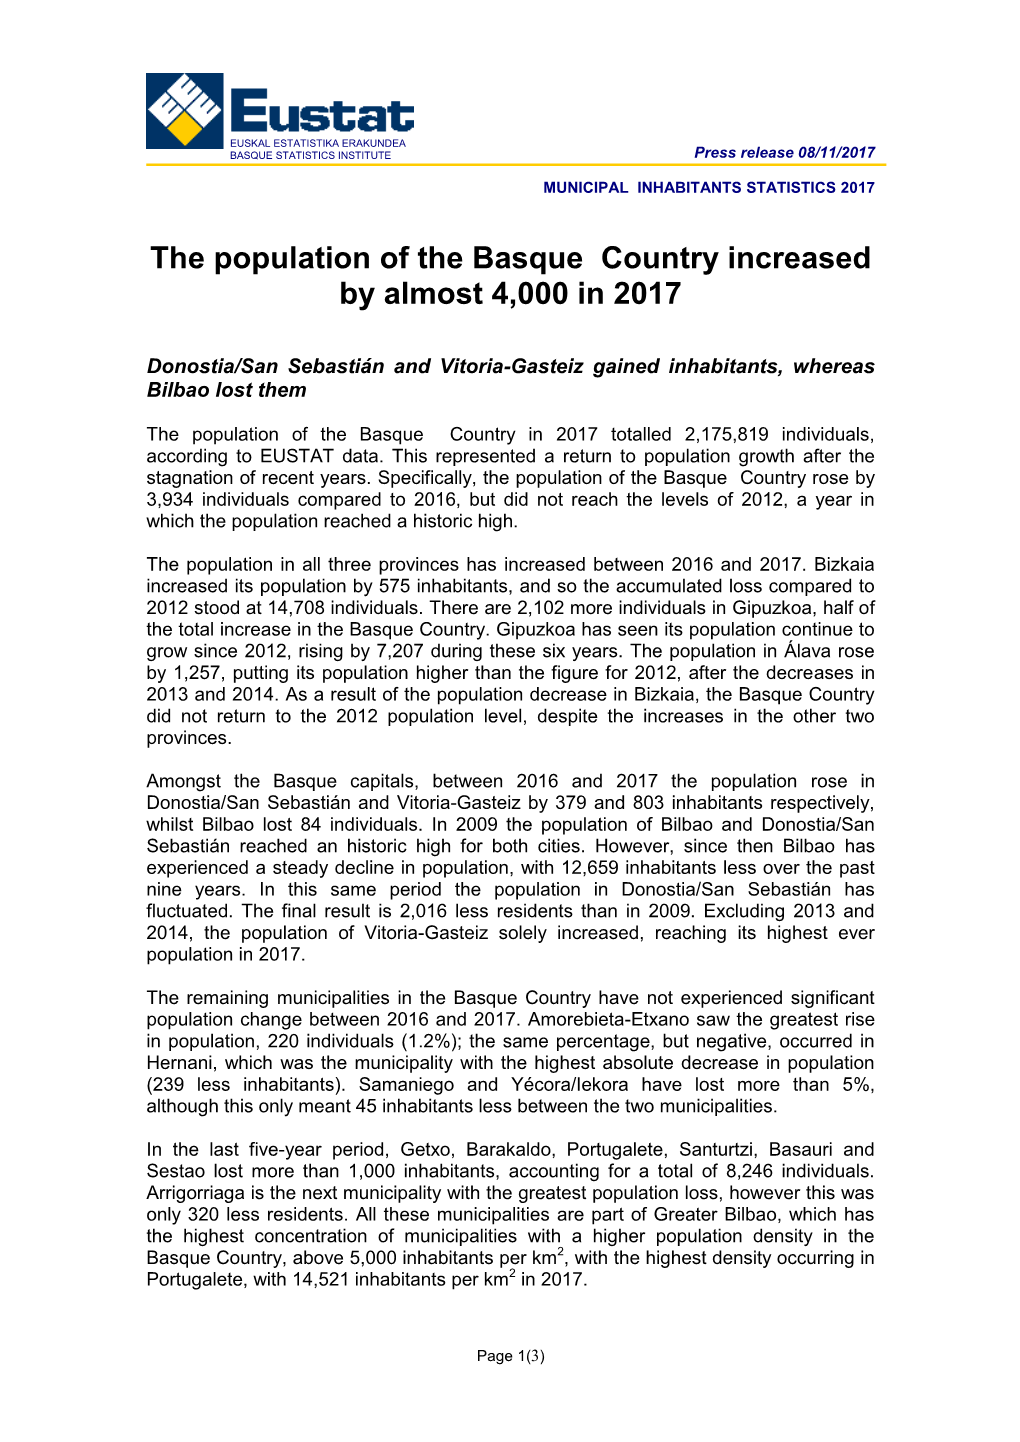 MUNICIPAL INHABITANTS STATISTICS 2017 . the Population of the Basque Country Increased by Almost 4,000 in 2017